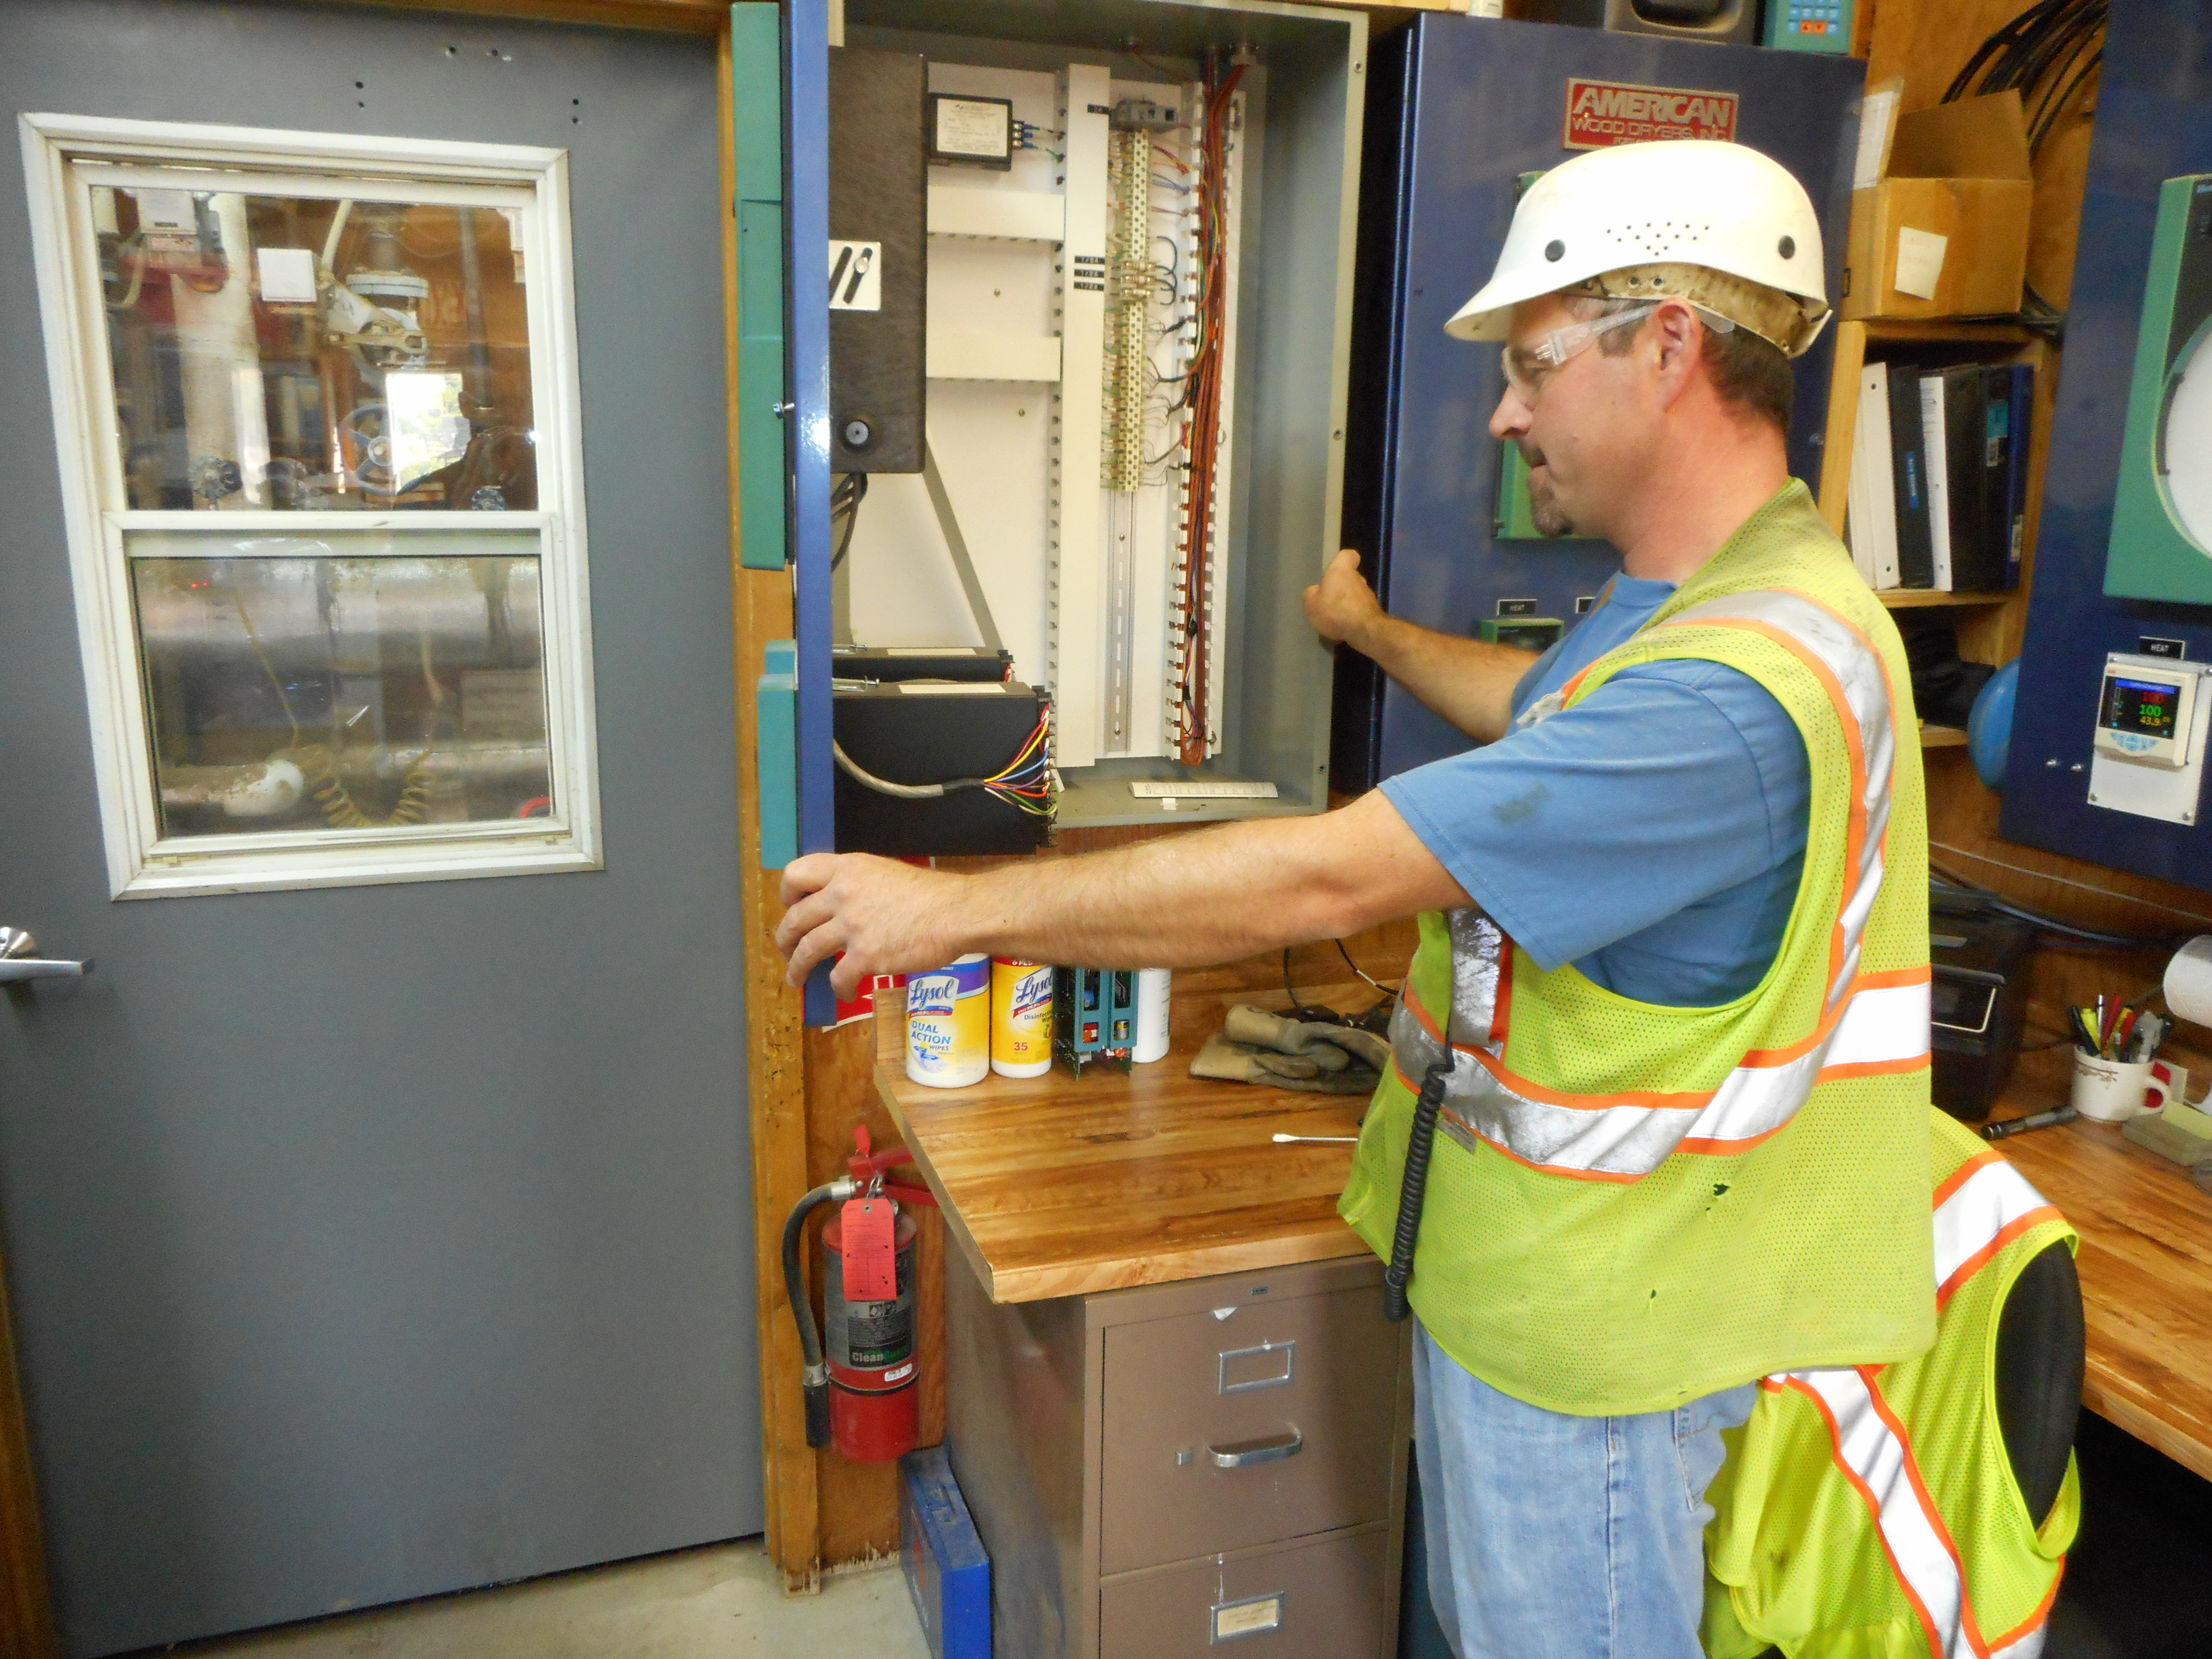 Mike Kolpack, shown at work at Kretz Lumber, began taking classes at
Northcentral Technical College in Antigo 18 years after his high school graduation.